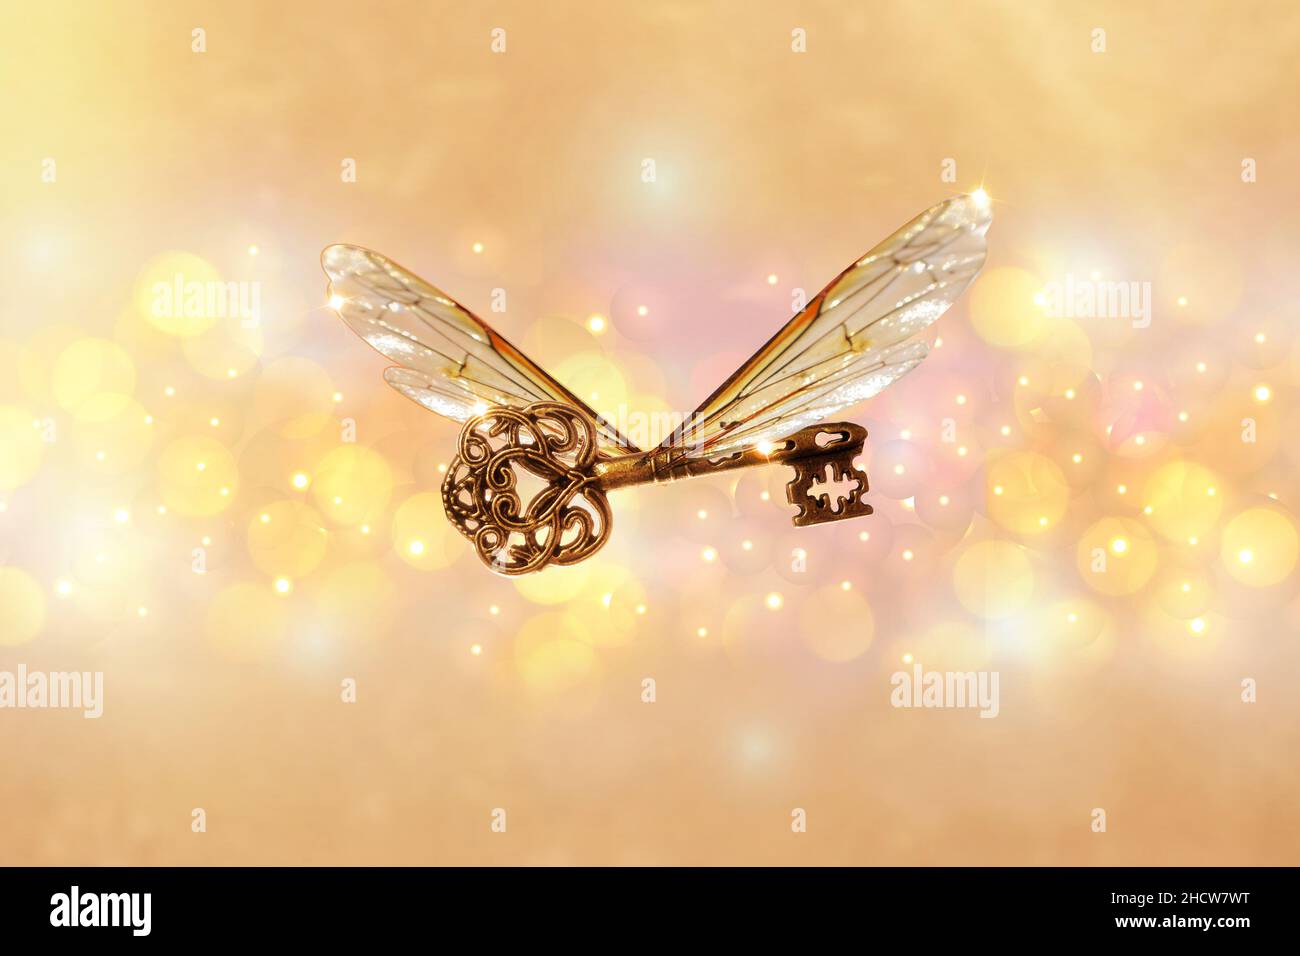 magical flying key meaning with dragonfly wings Stock Photo